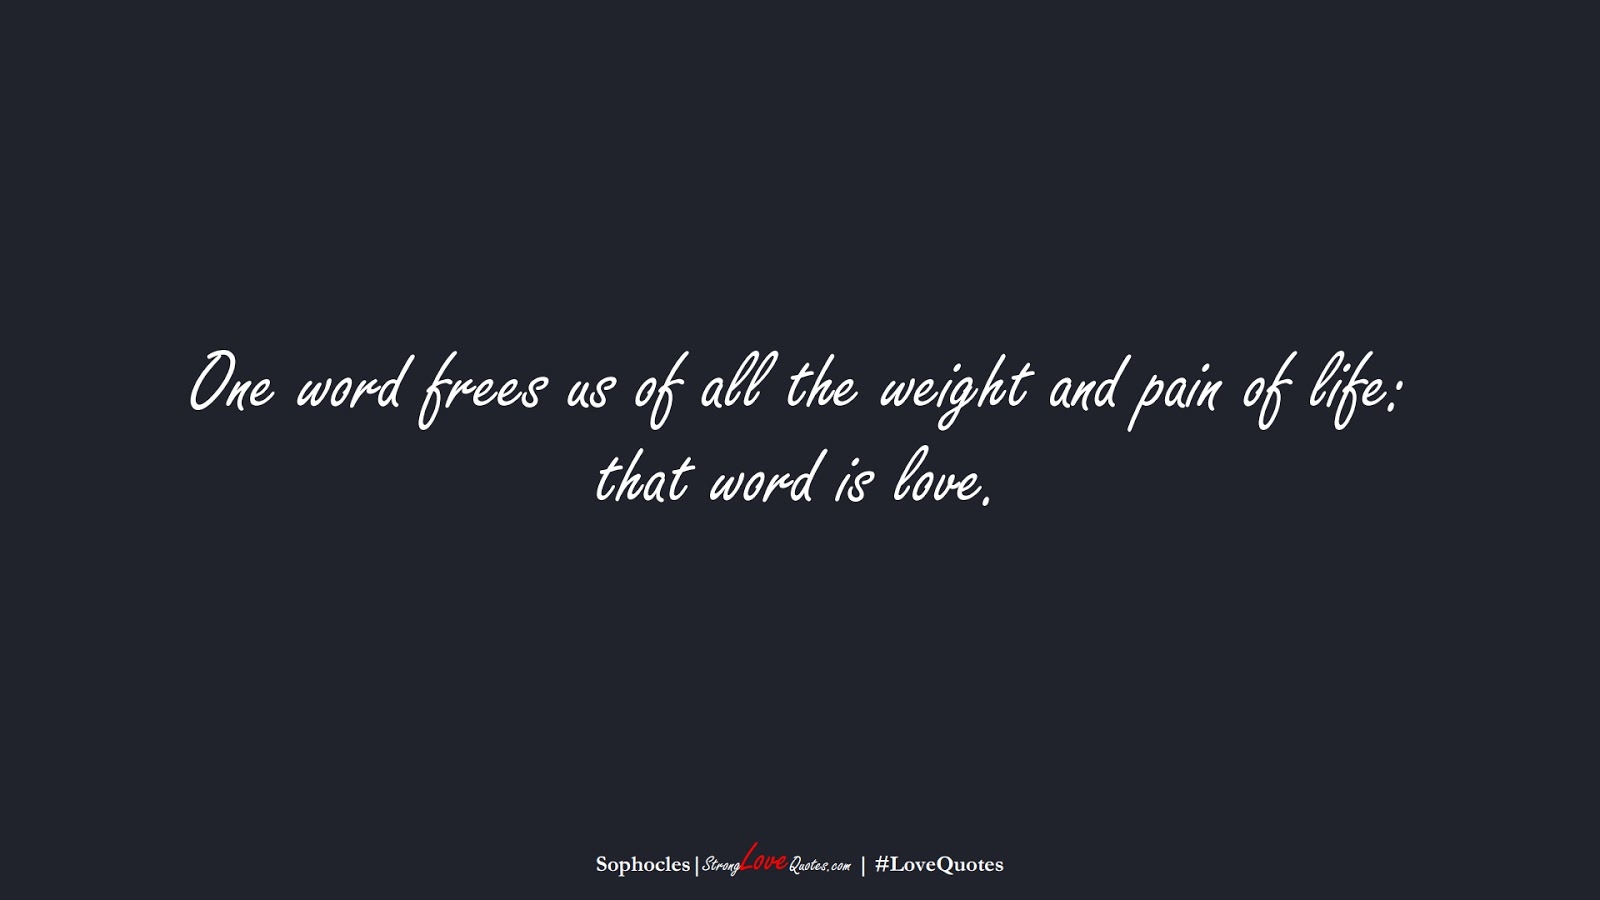 One word frees us of all the weight and pain of life: that word is love. (Sophocles);  #LoveQuotes